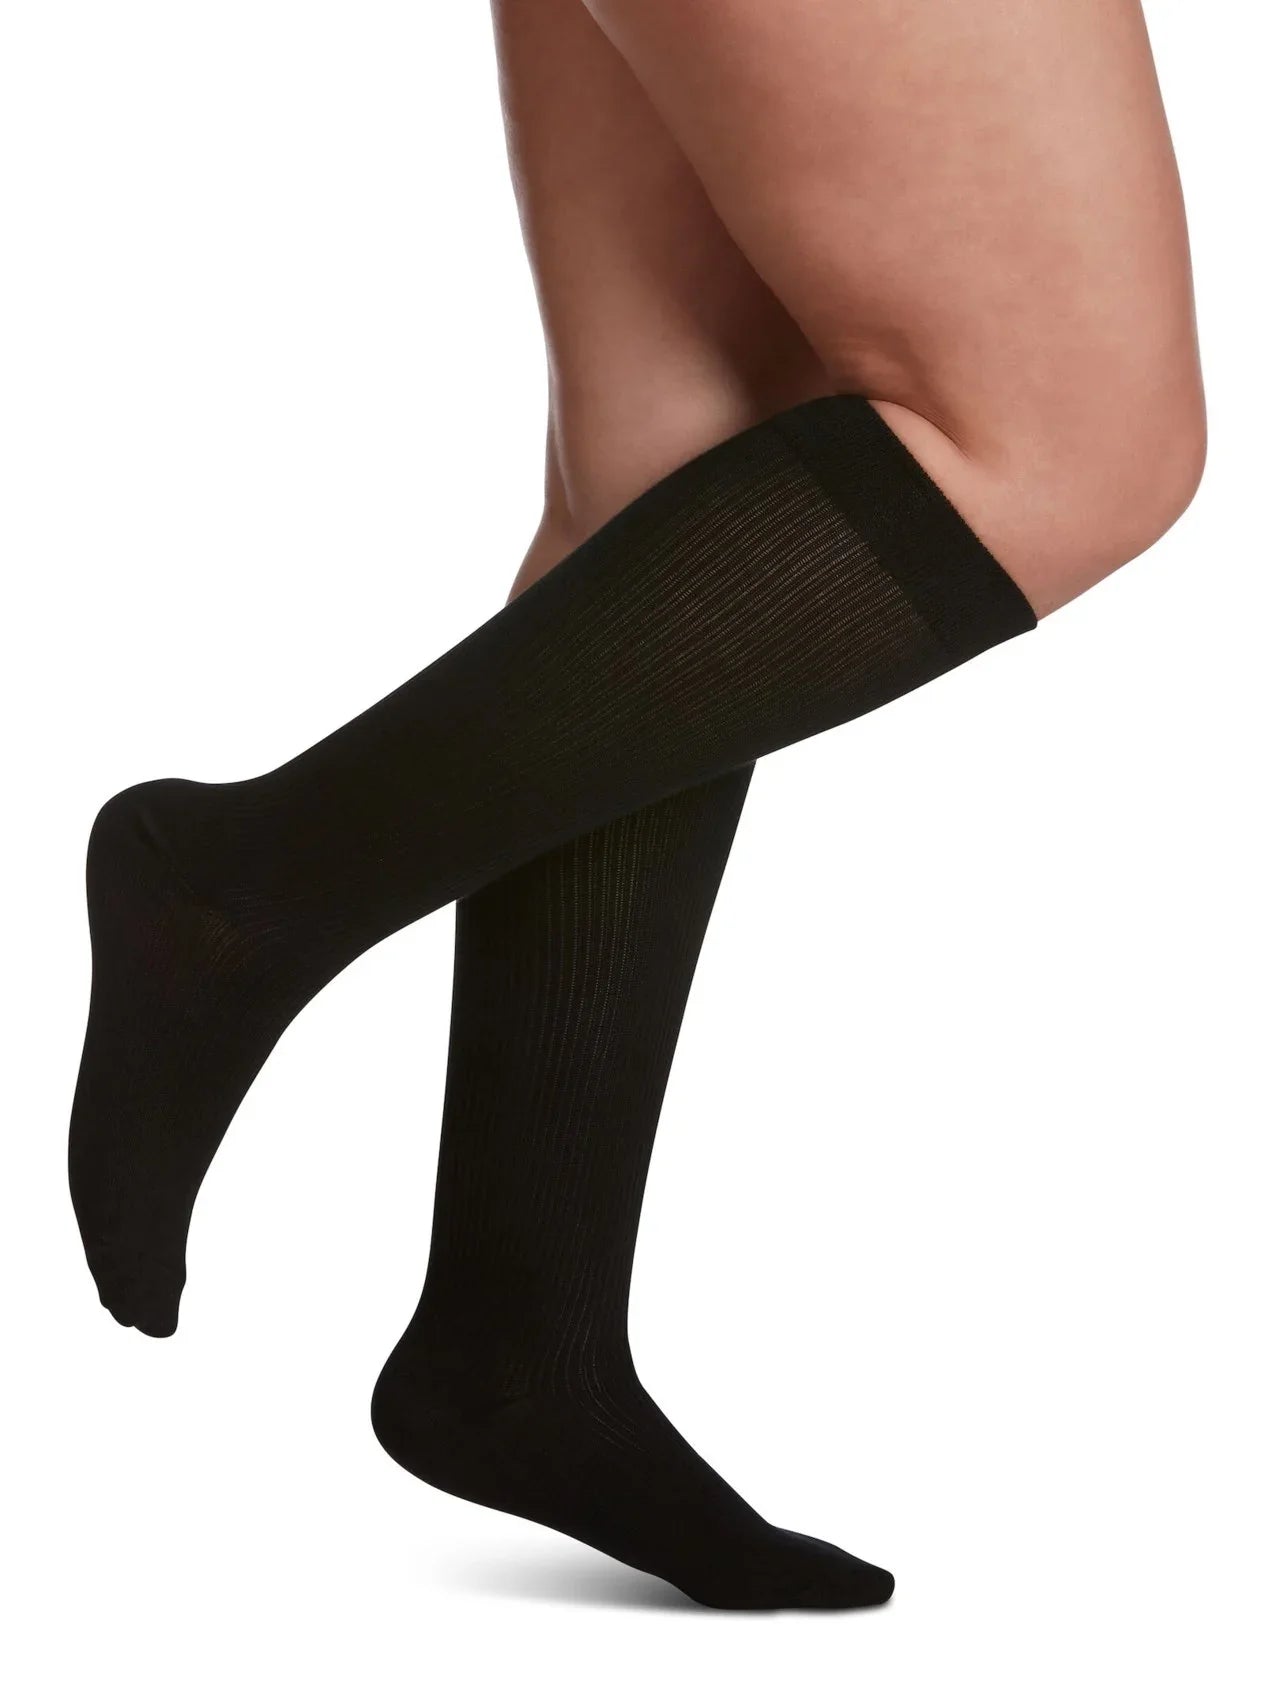 Sigvaris 140 Casual Cotton Compression Socks 15-20 mmHg Calf High For Women Closed Toe